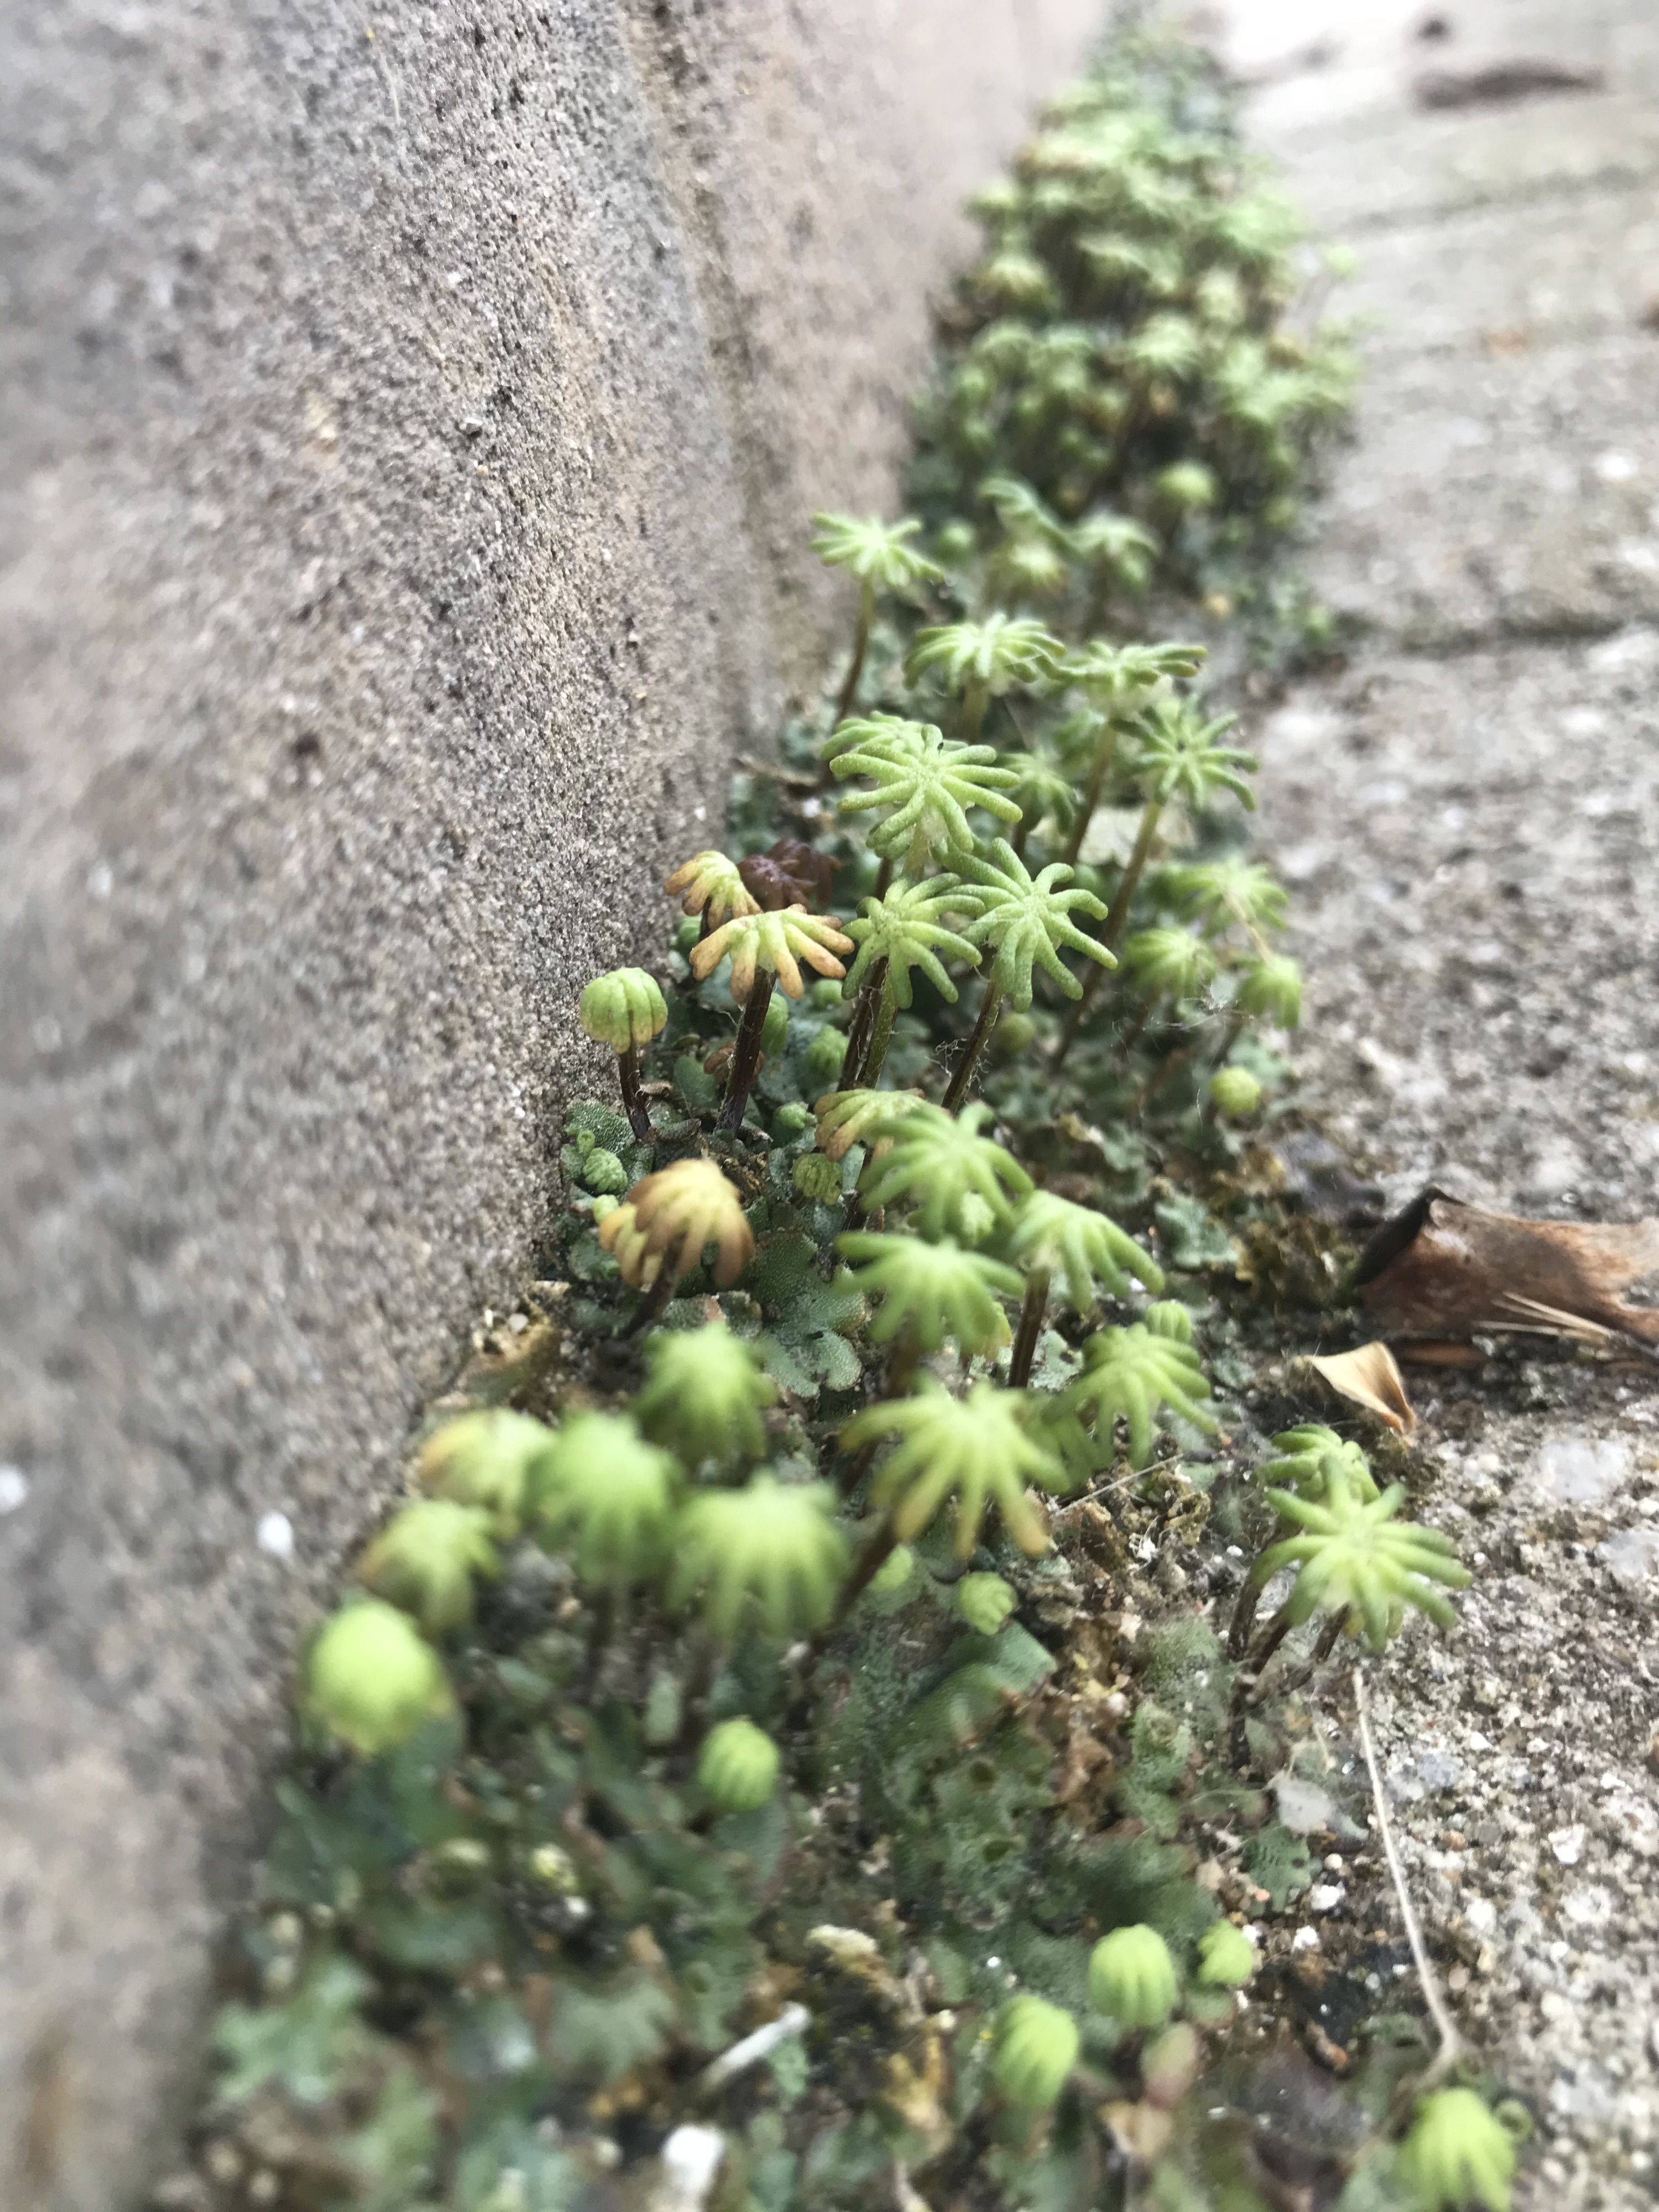 A Marchantia liverwort growing in cracks in the pavement.